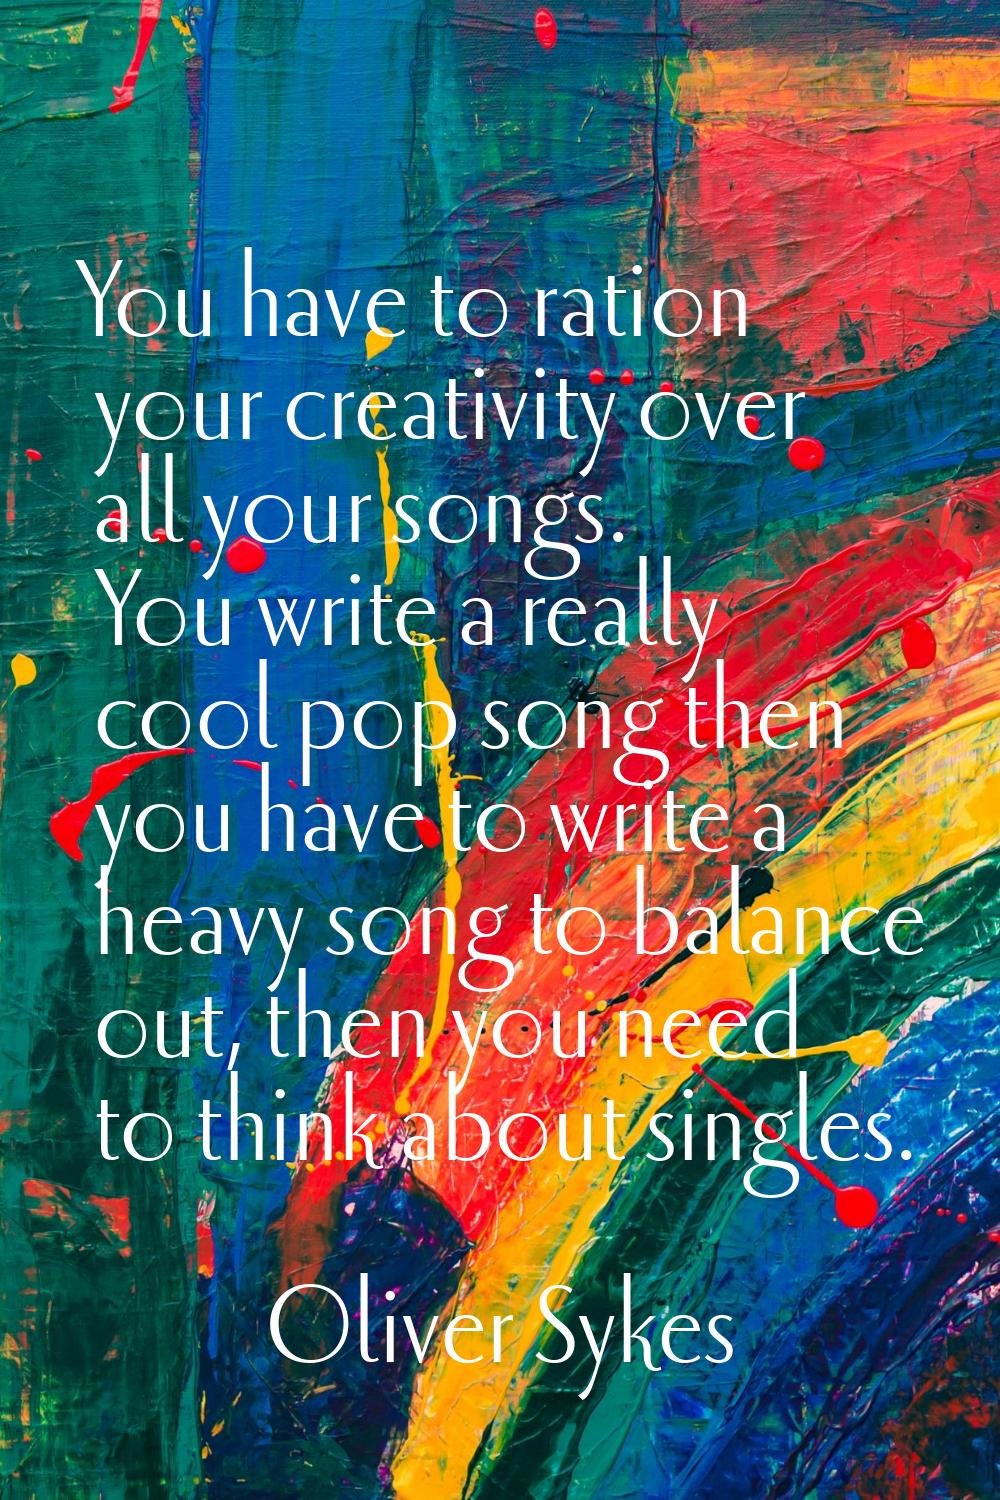 You have to ration your creativity over all your songs. You write a really cool pop song then you h